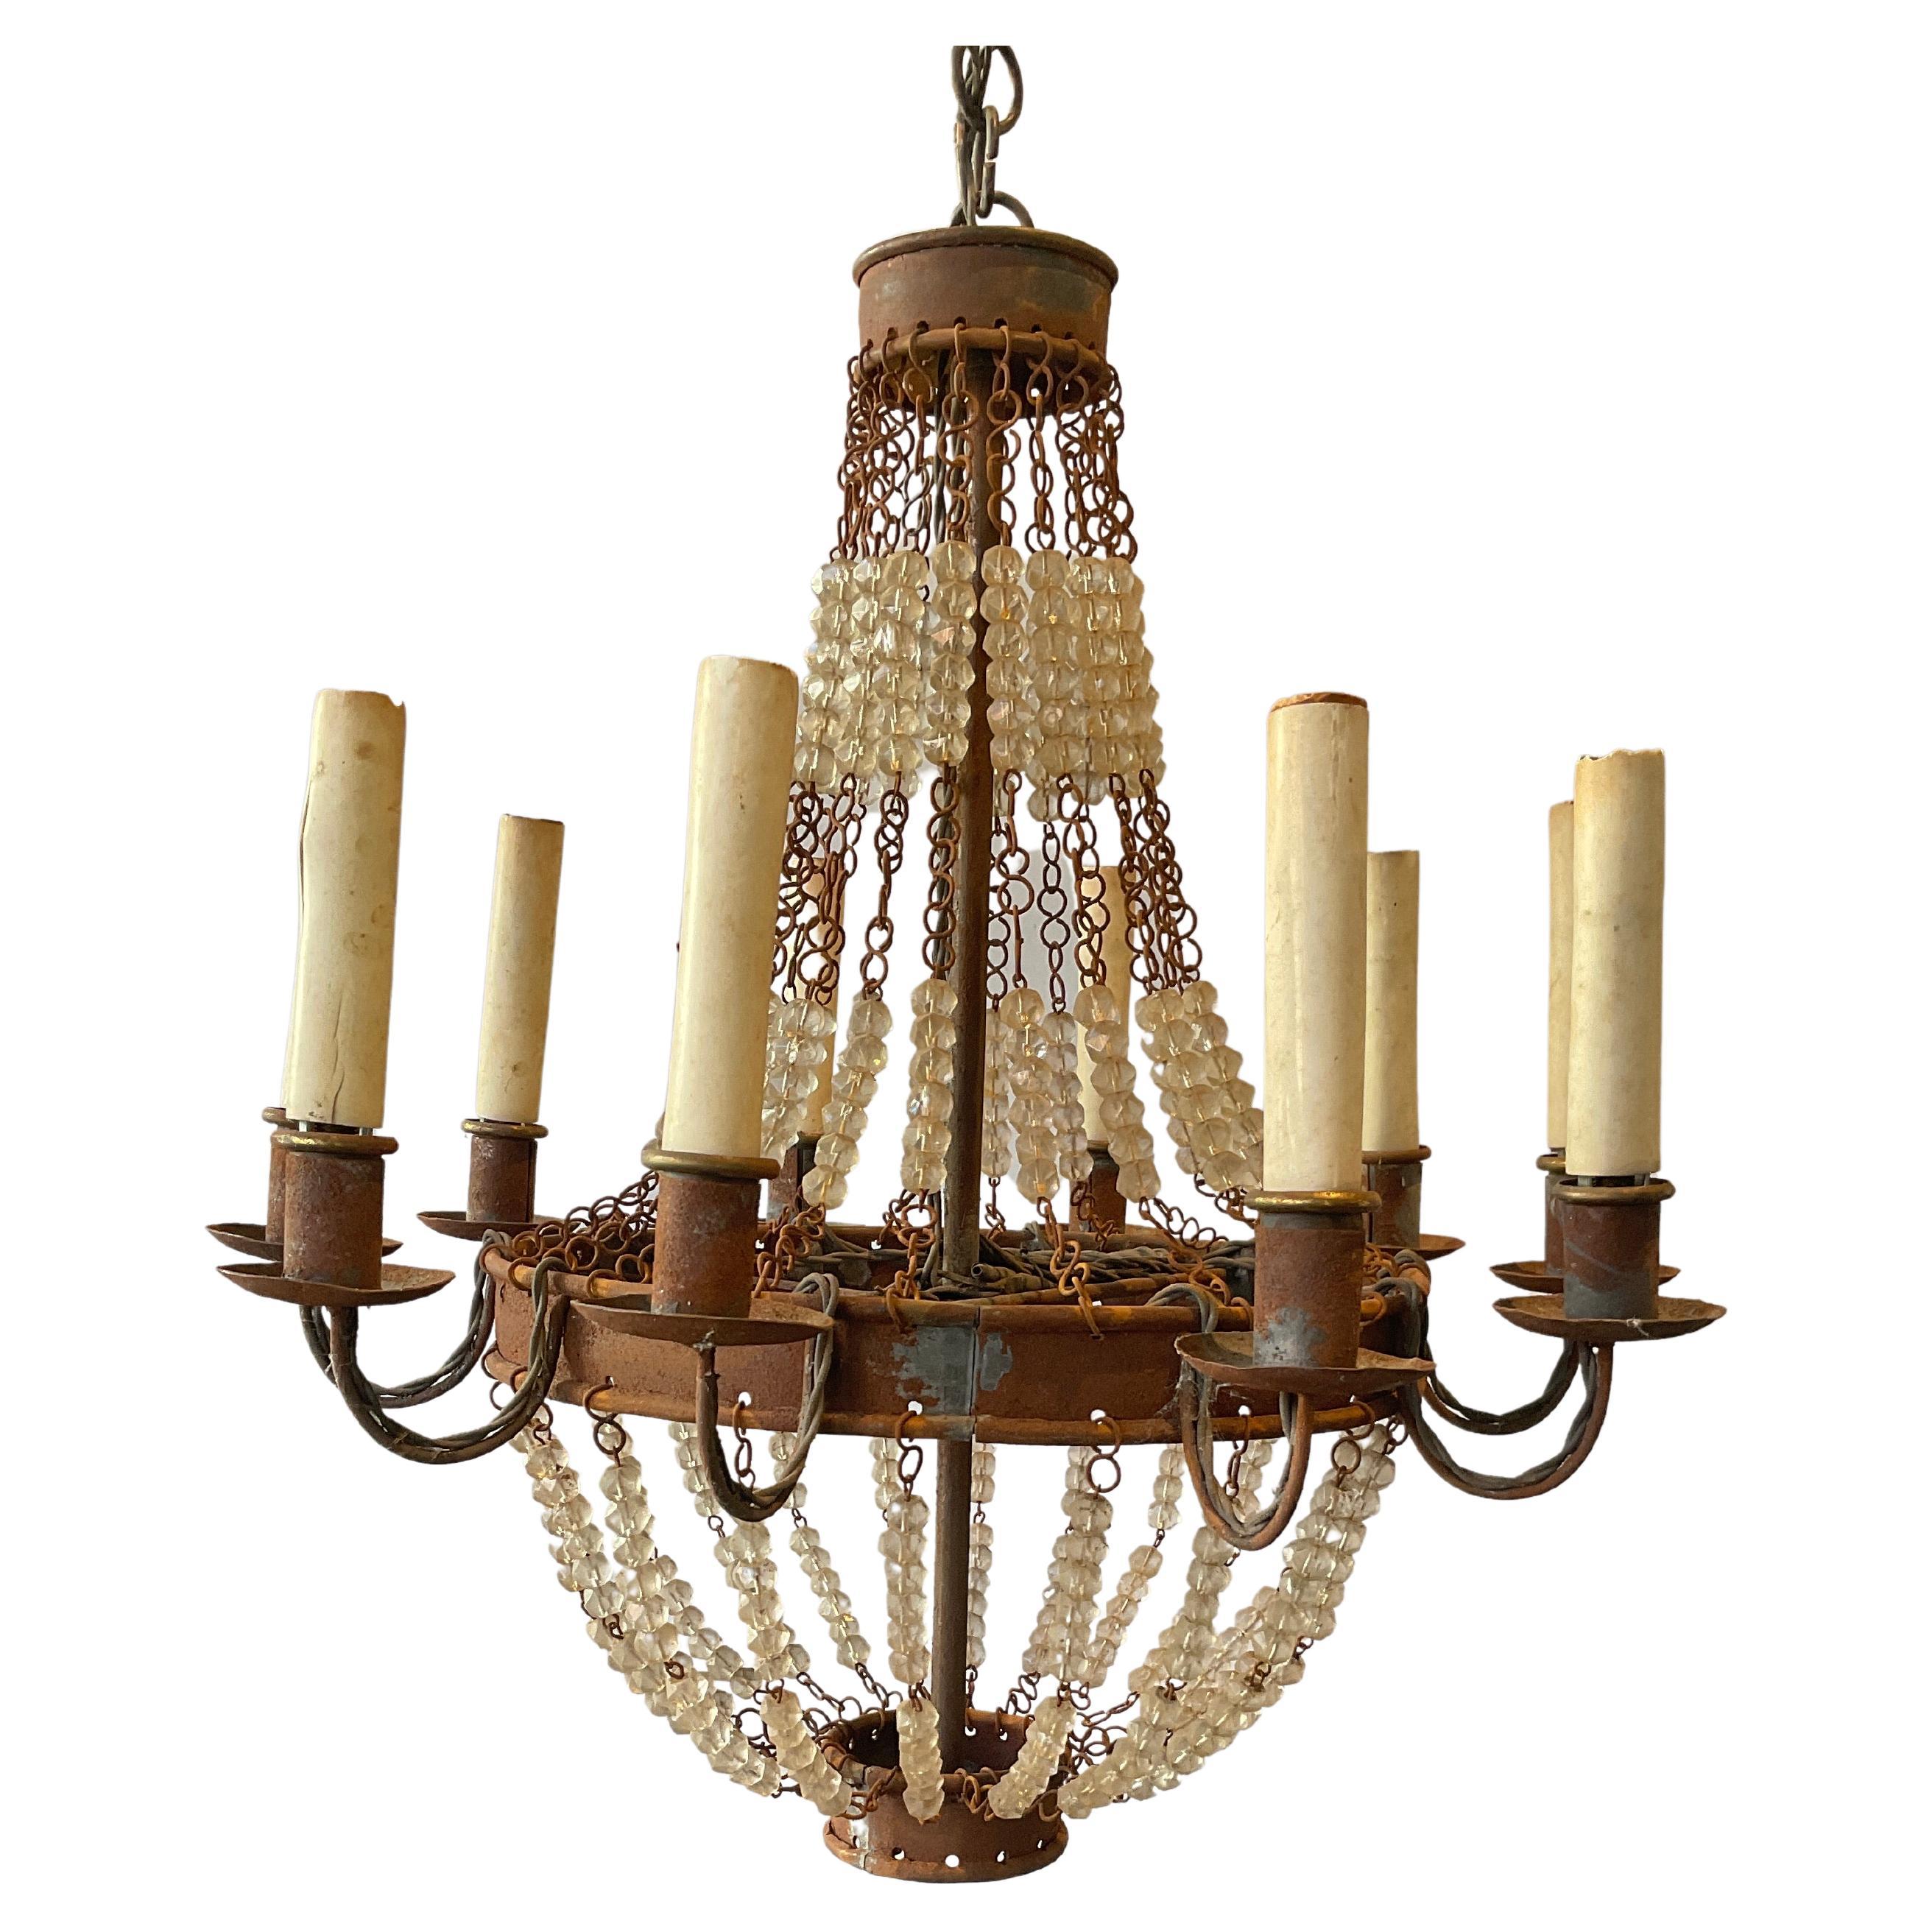 1970s French Style Beaded Rusted Metal Chandelier For Sale